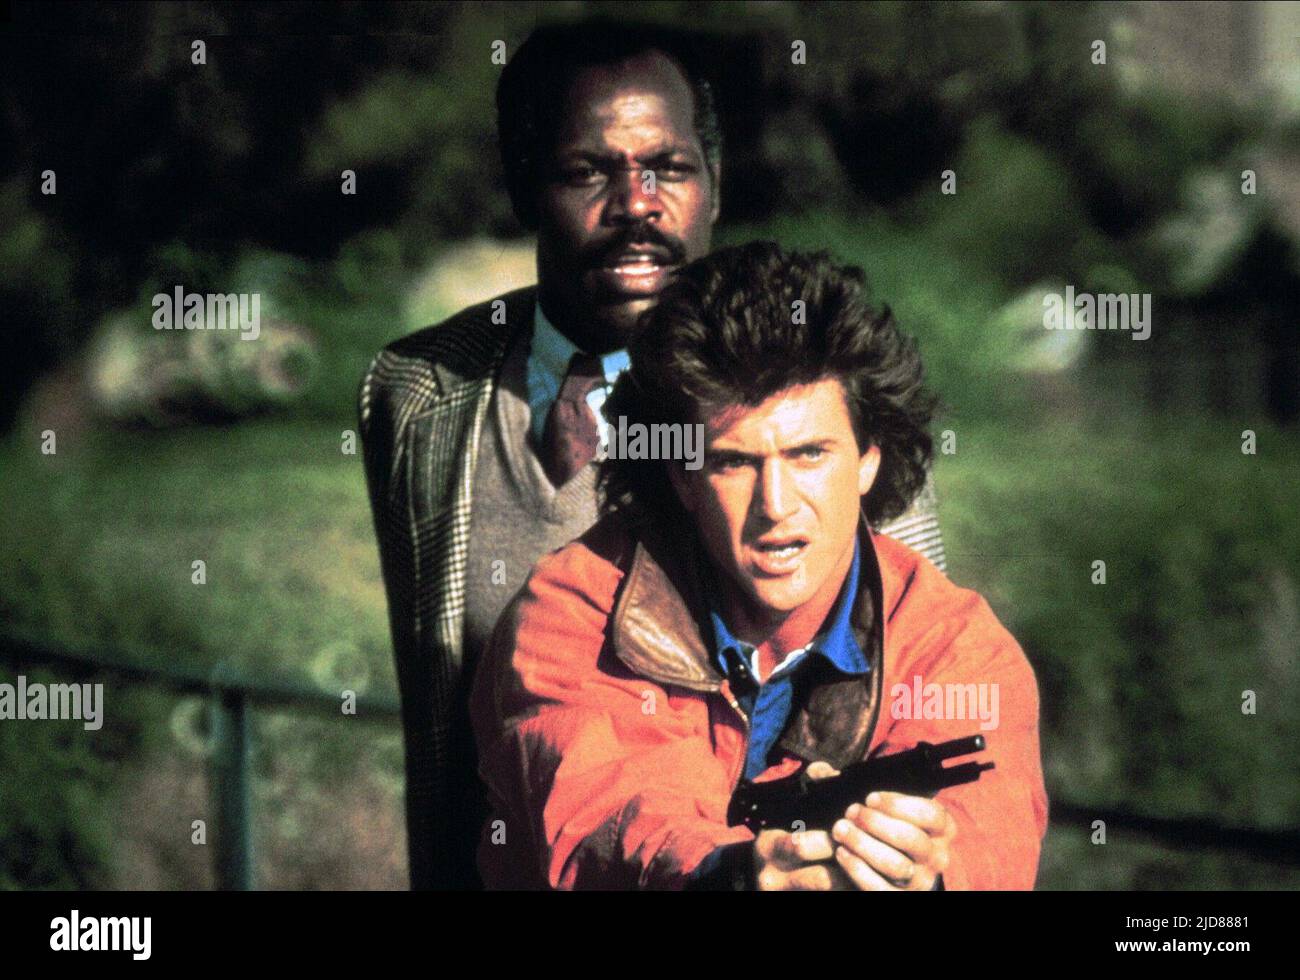 GLOVER, GIBSON, LETHAL WEAPON, 1987, Stockfoto